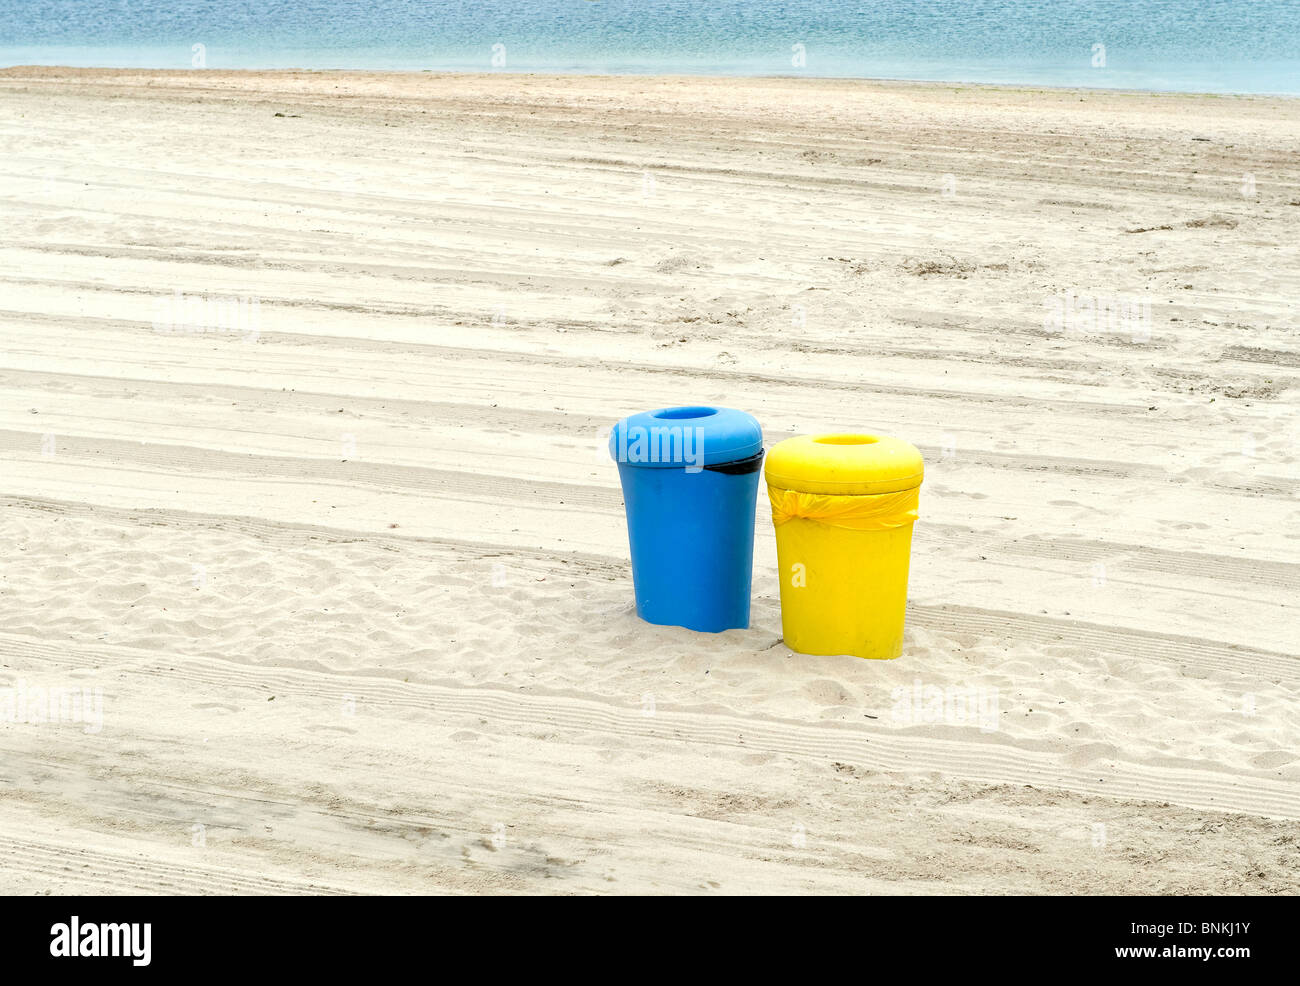 Two Colorful Waste Bins on a Deserted Beach Stock Photo